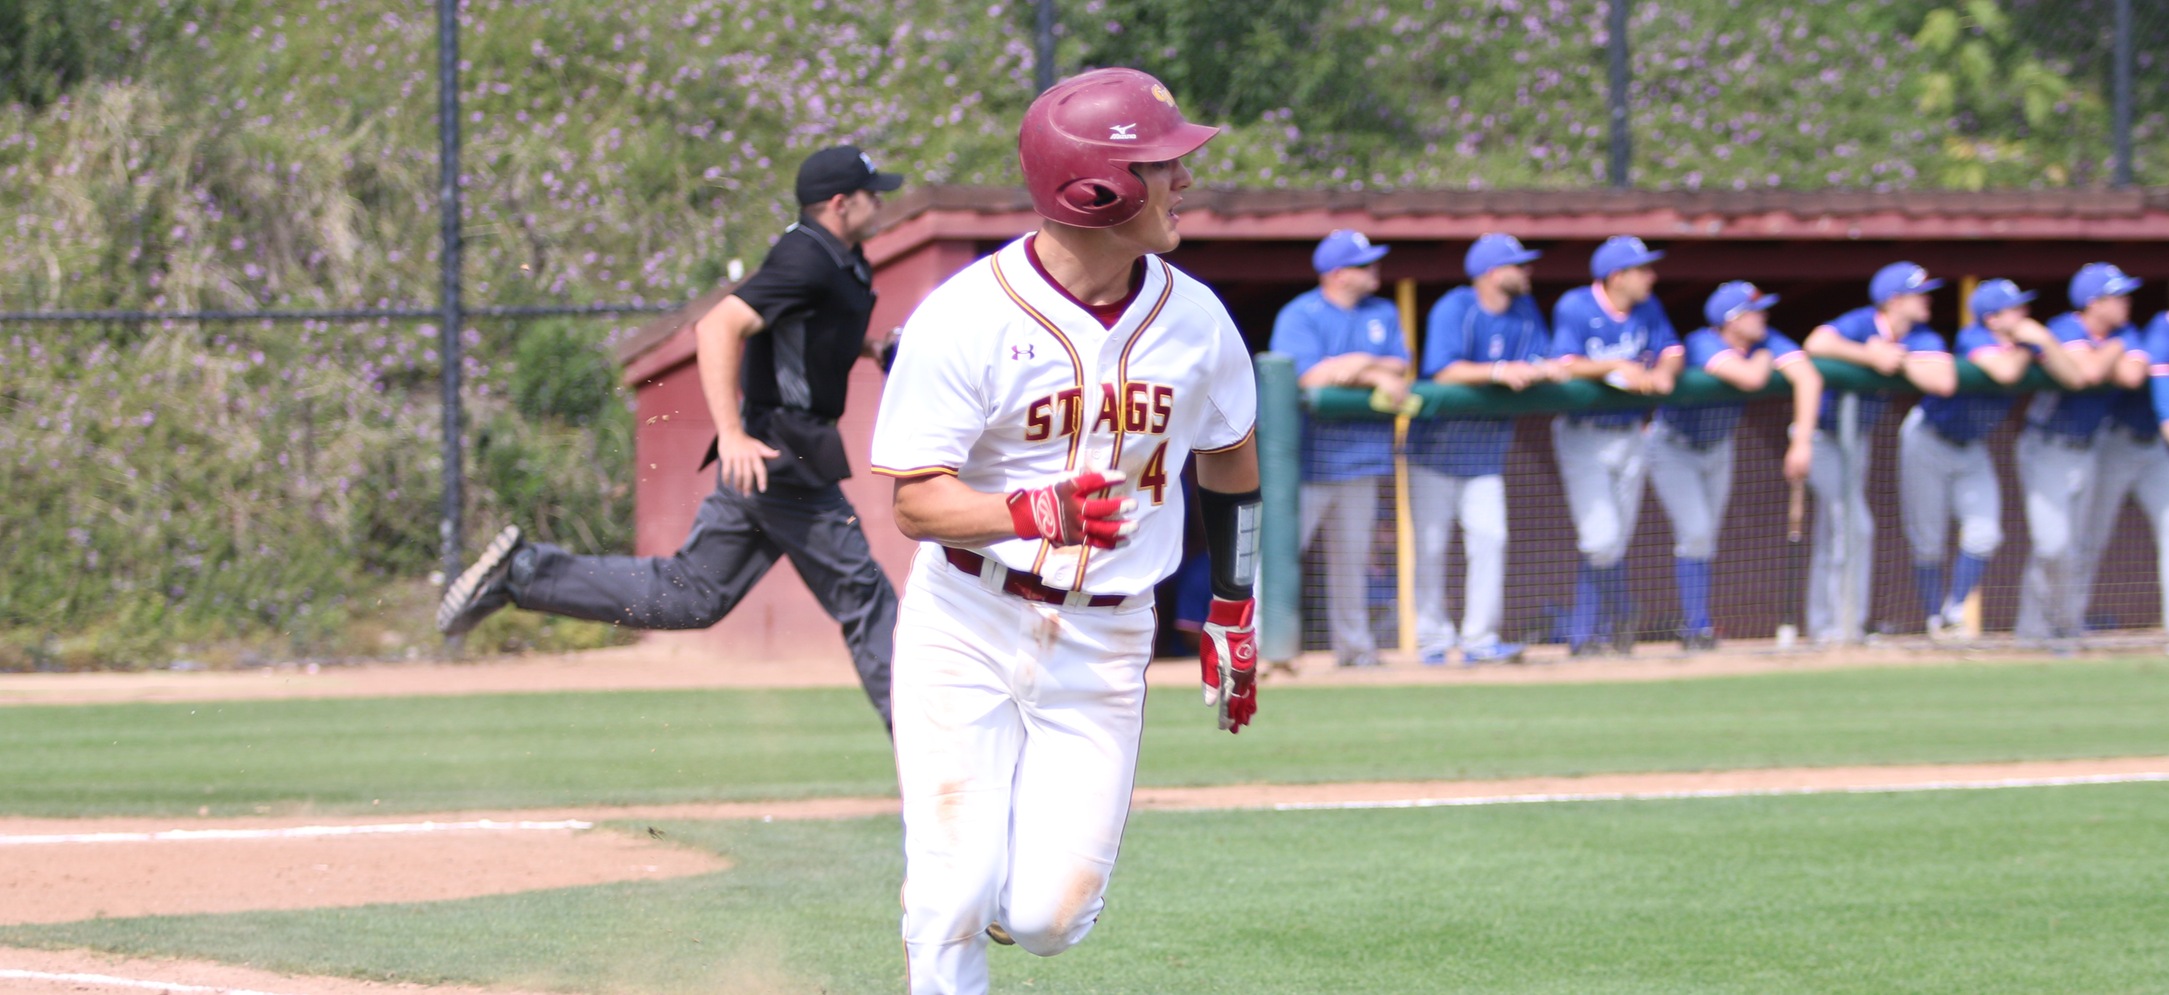 Chapman Takes Two From Stags to Sweep Weekend Series